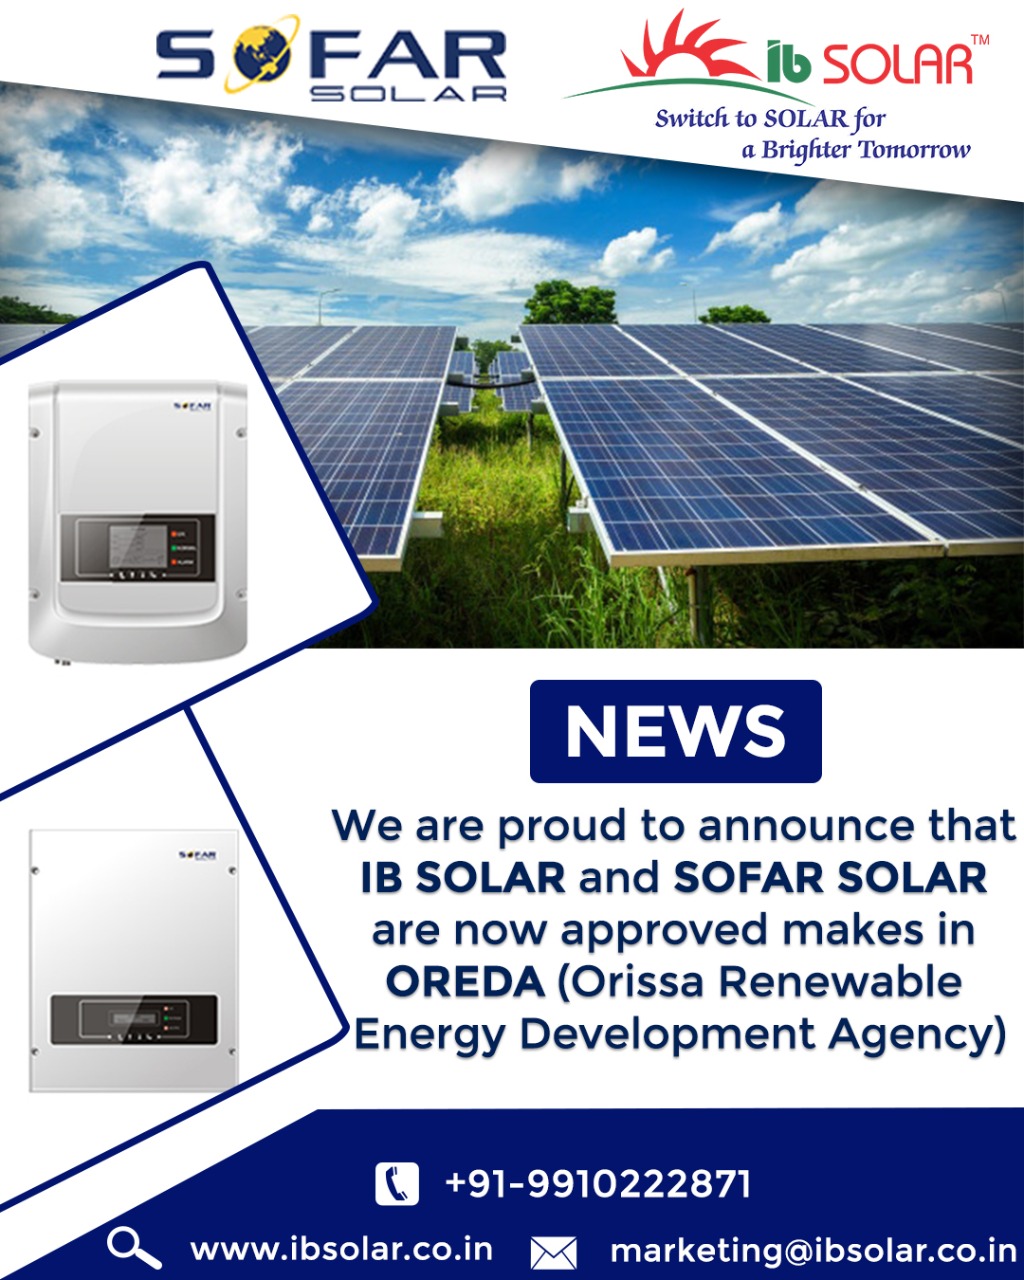 IB solar and Sofar solar are now approved makes in OREDA